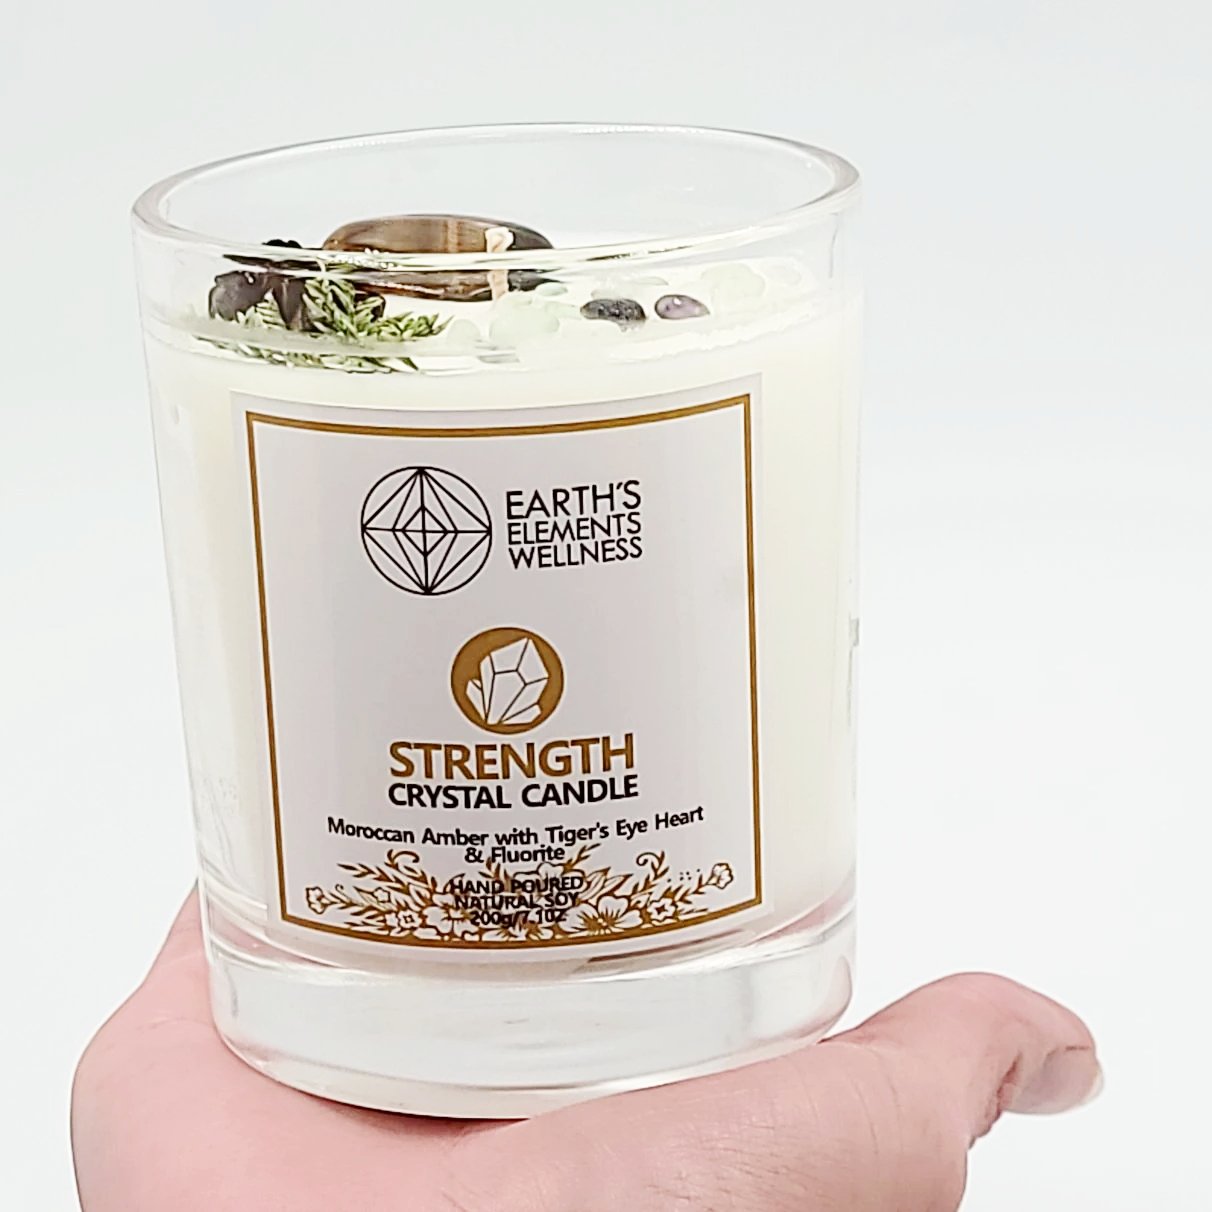 Strength Crystal Candle Scented 7.1oz 200g - Elevated Metaphysical